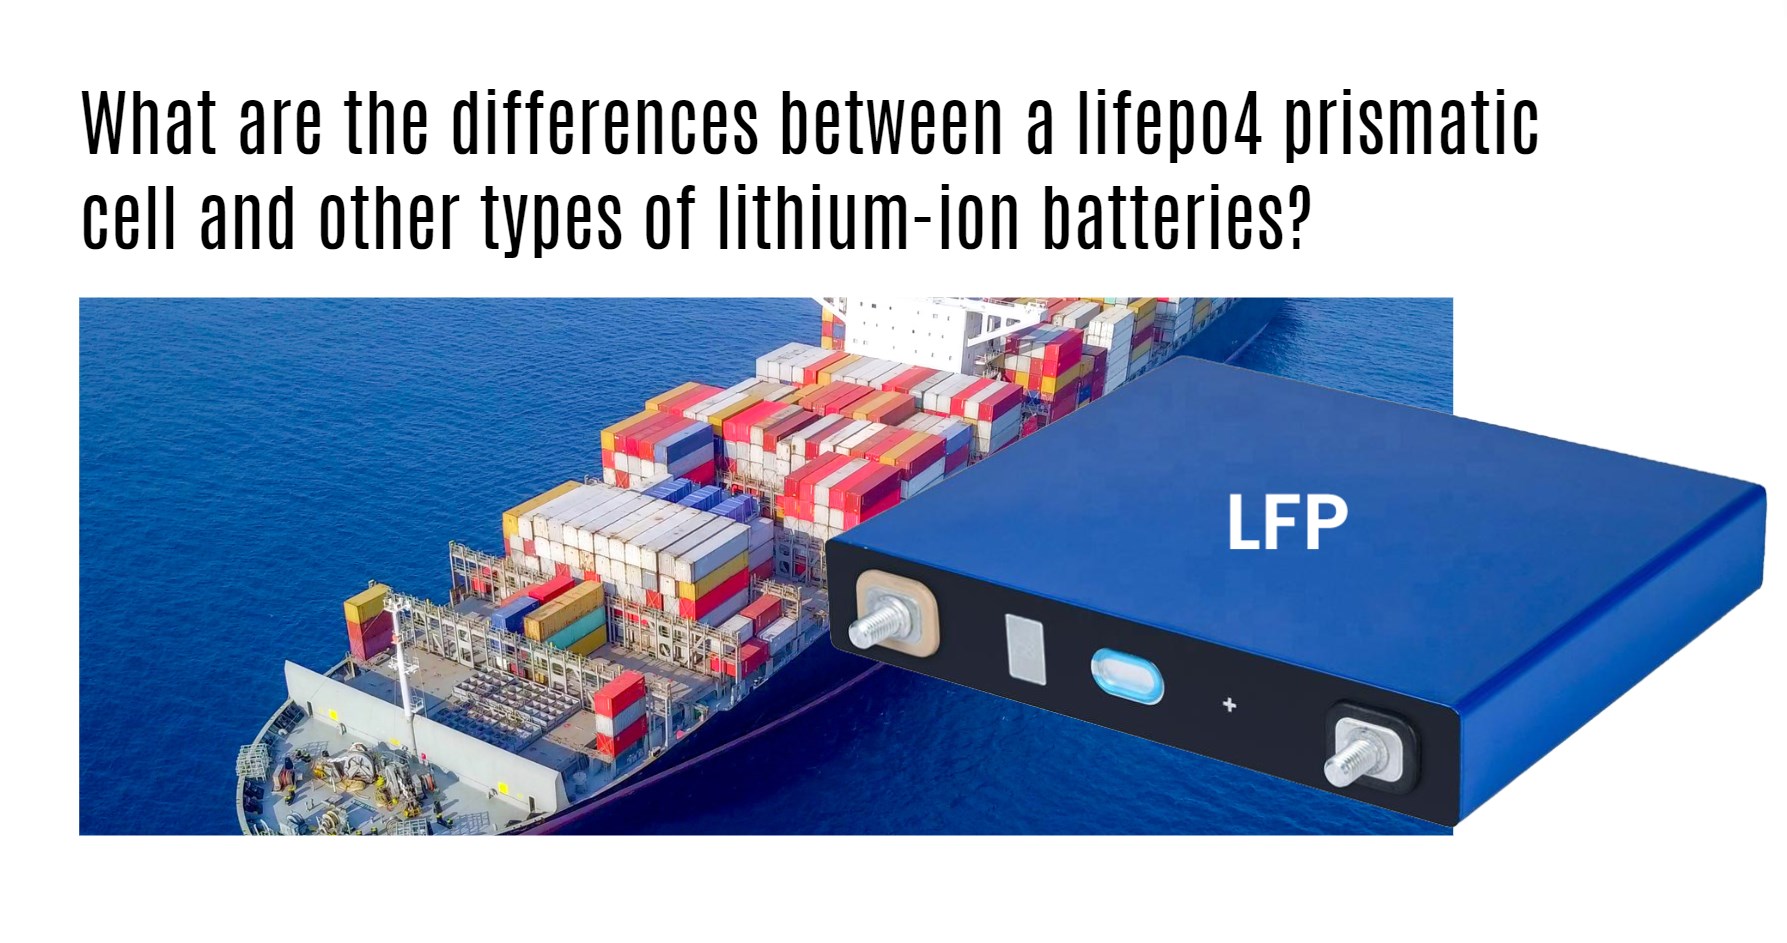 What are the differences between a lifepo4 prismatic cell and other types of lithium-ion batteries?